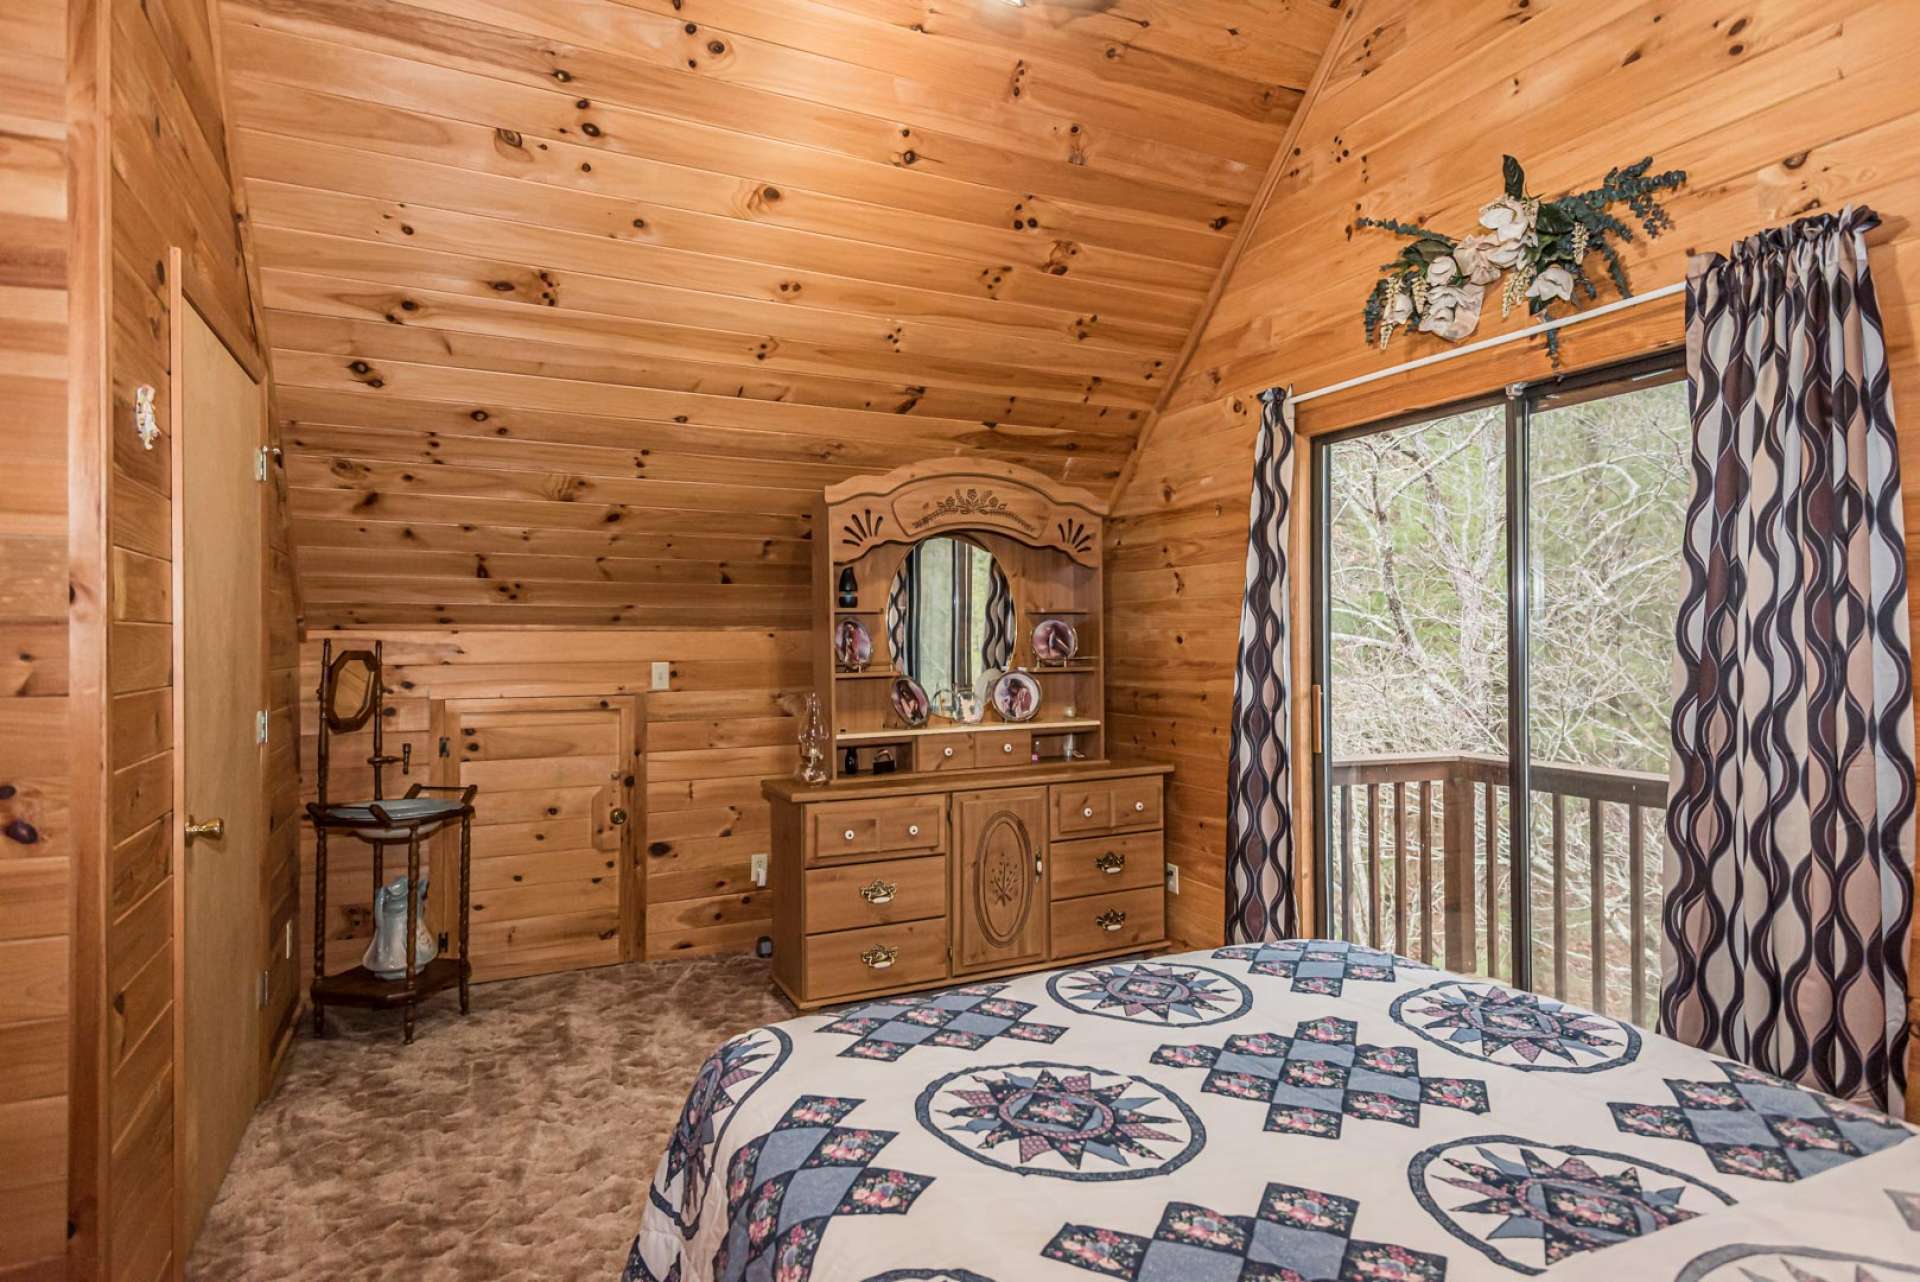 The upper level features a vaulted guest bedroom, full bath, and a vaulted bonus room currently utilized as additional sleeping space. The upper level bedroom also features a private balcony to enjoy Nature and the mountain scenery.